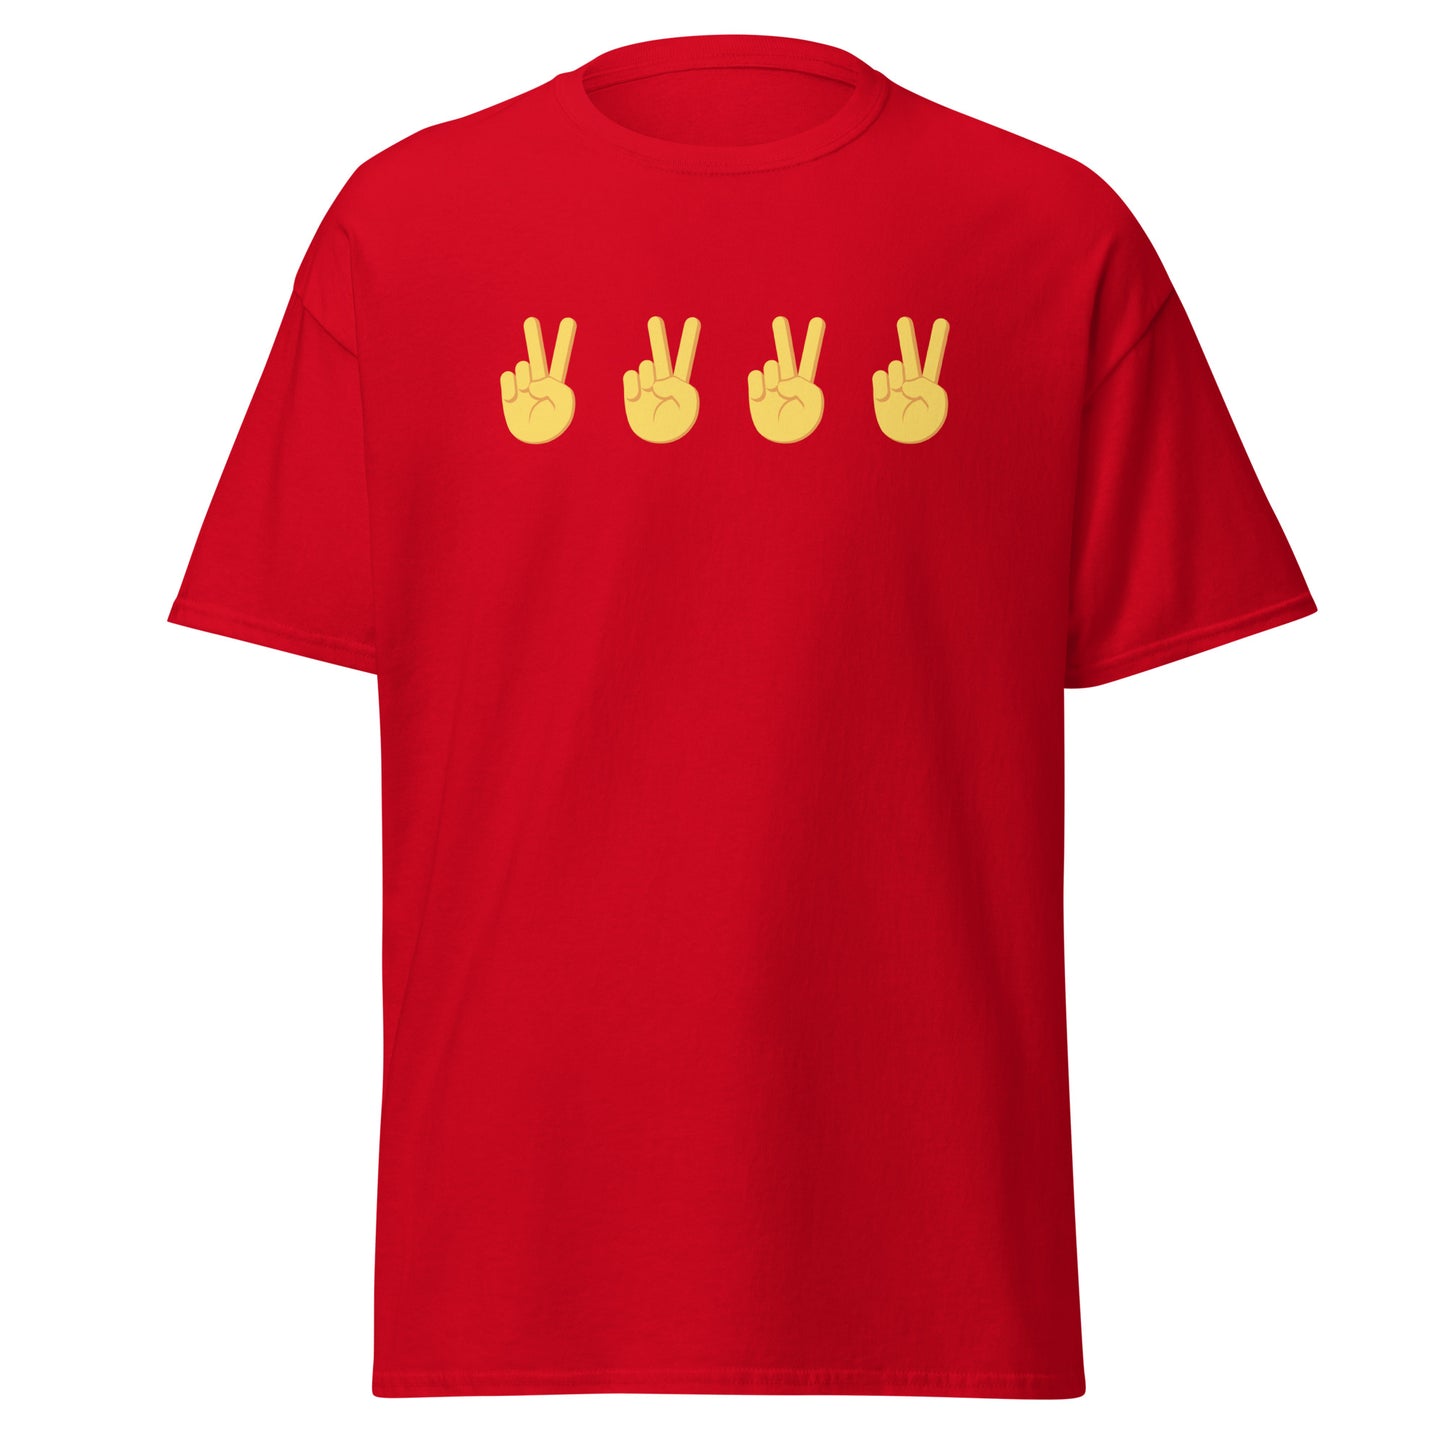 Classic Everyday Utah 4 In A Row ✌️ Simple USC Tee